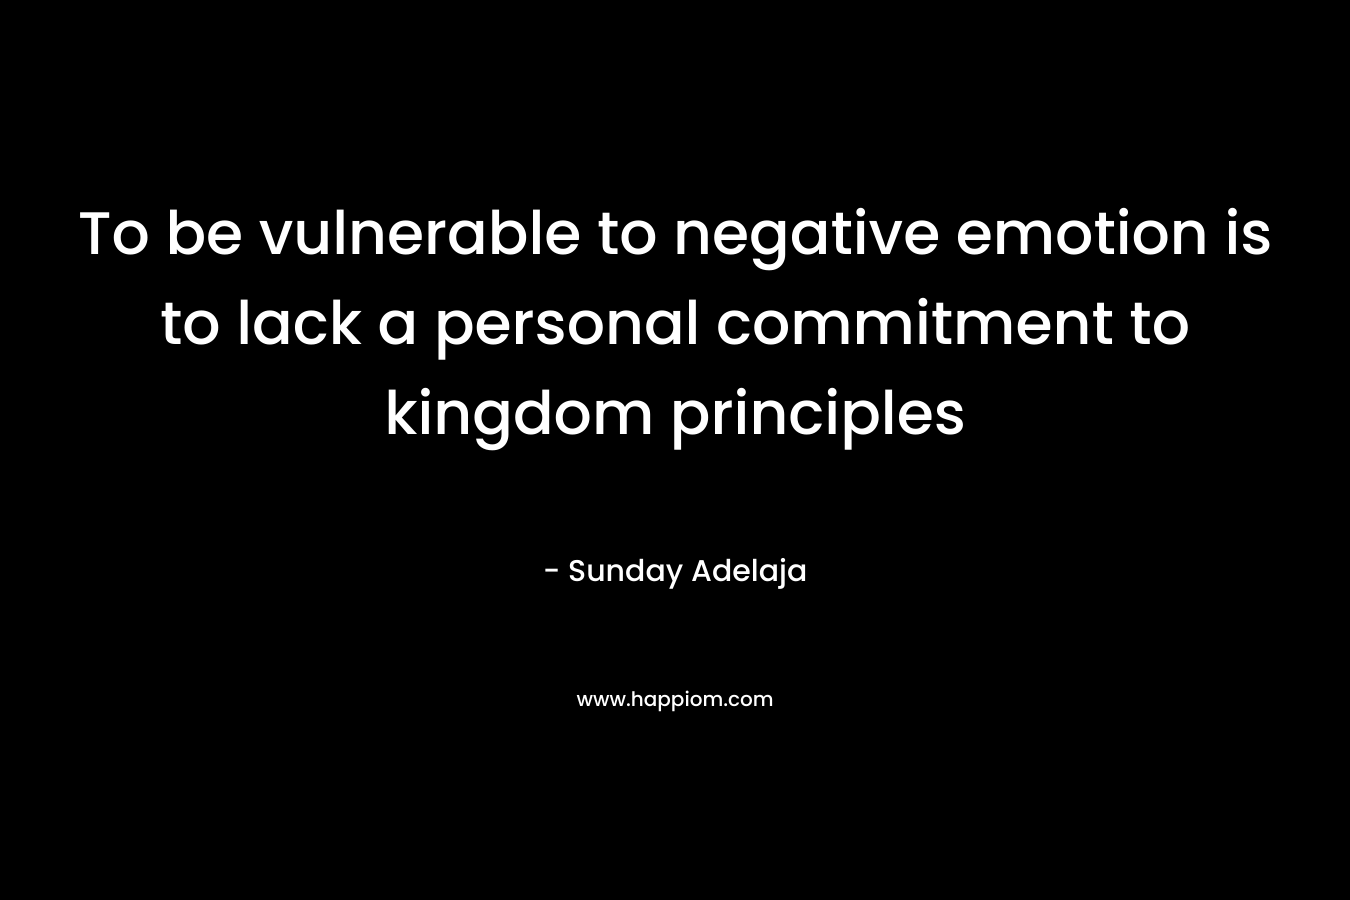 To be vulnerable to negative emotion is to lack a personal commitment to kingdom principles – Sunday Adelaja